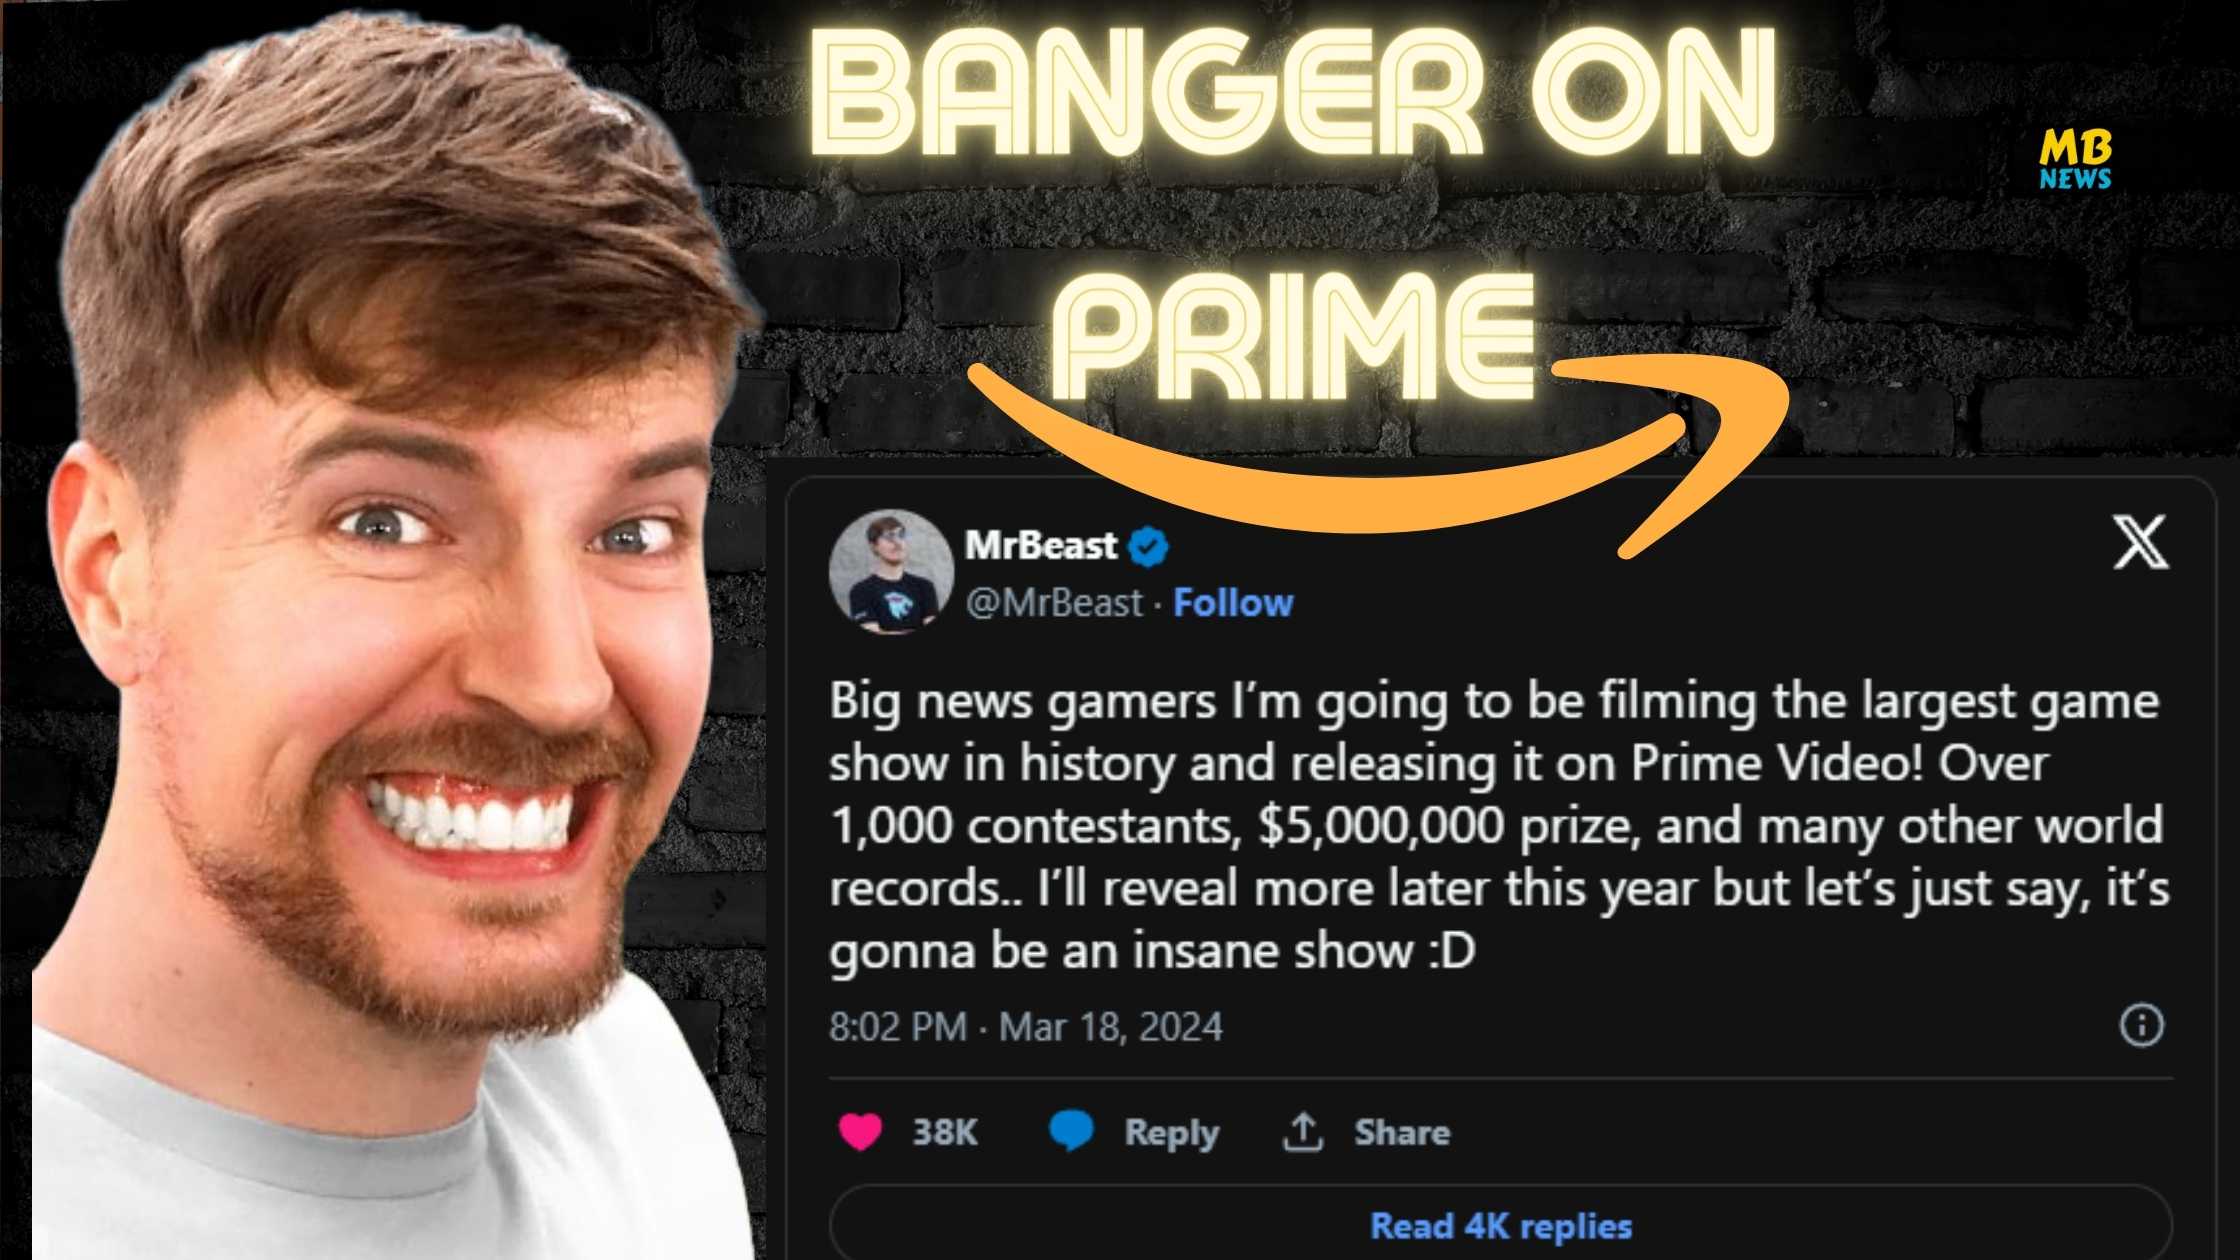 Big news gamers I’m going to be filming the largest game show in history and releasing it on Prime Video! Over 1,000 contestants, $5,000,000 prize, and many other world records.. I’ll reveal more later this year but let’s just say, it’s gonna be an insane show